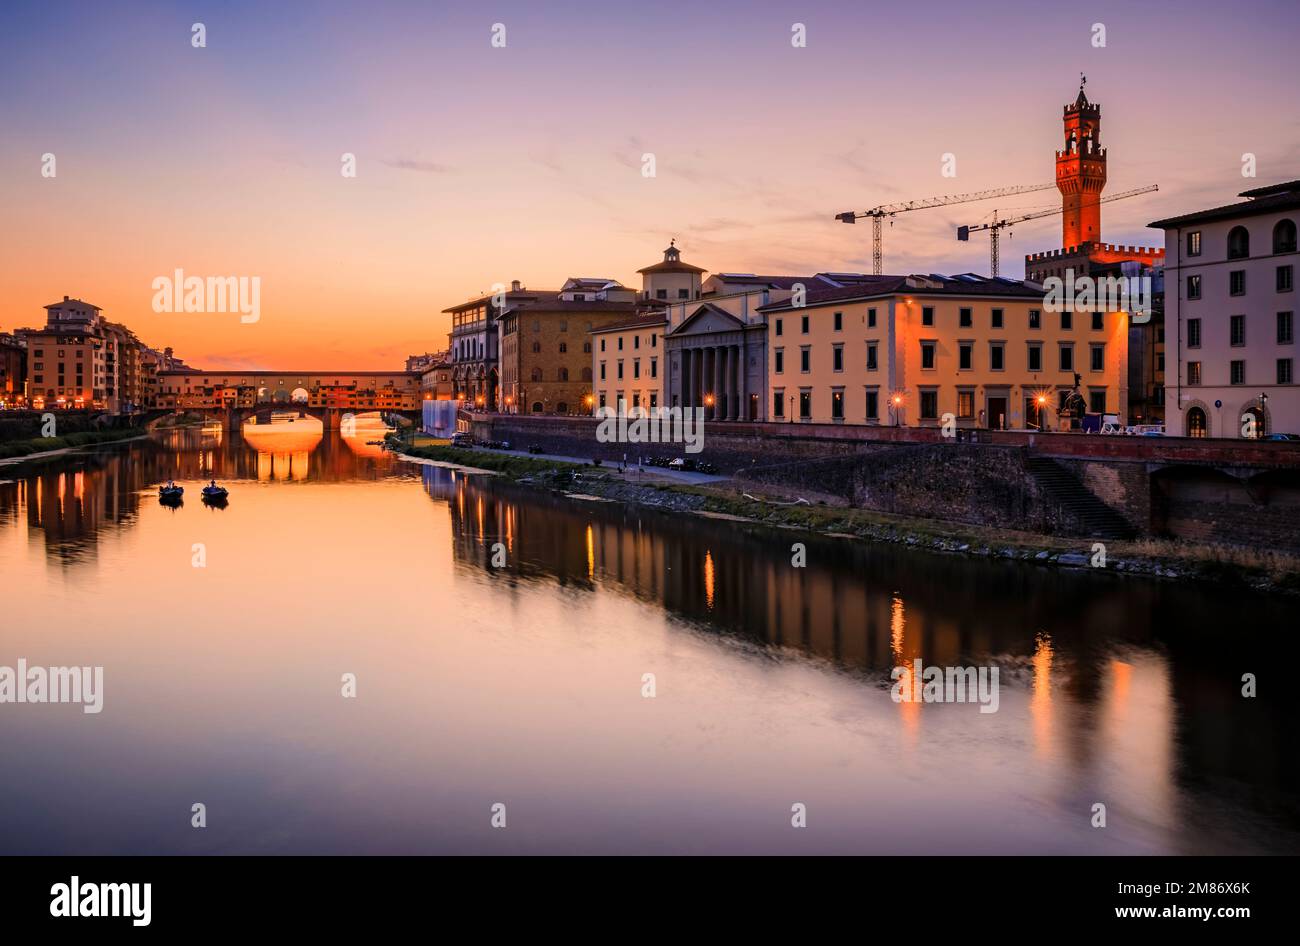 Sunset cityscape with the famous bridge of Ponte Vecchio on the river Arno River and Palazzo Vecchio in Centro Storico, Florence, Italy Stock Photo